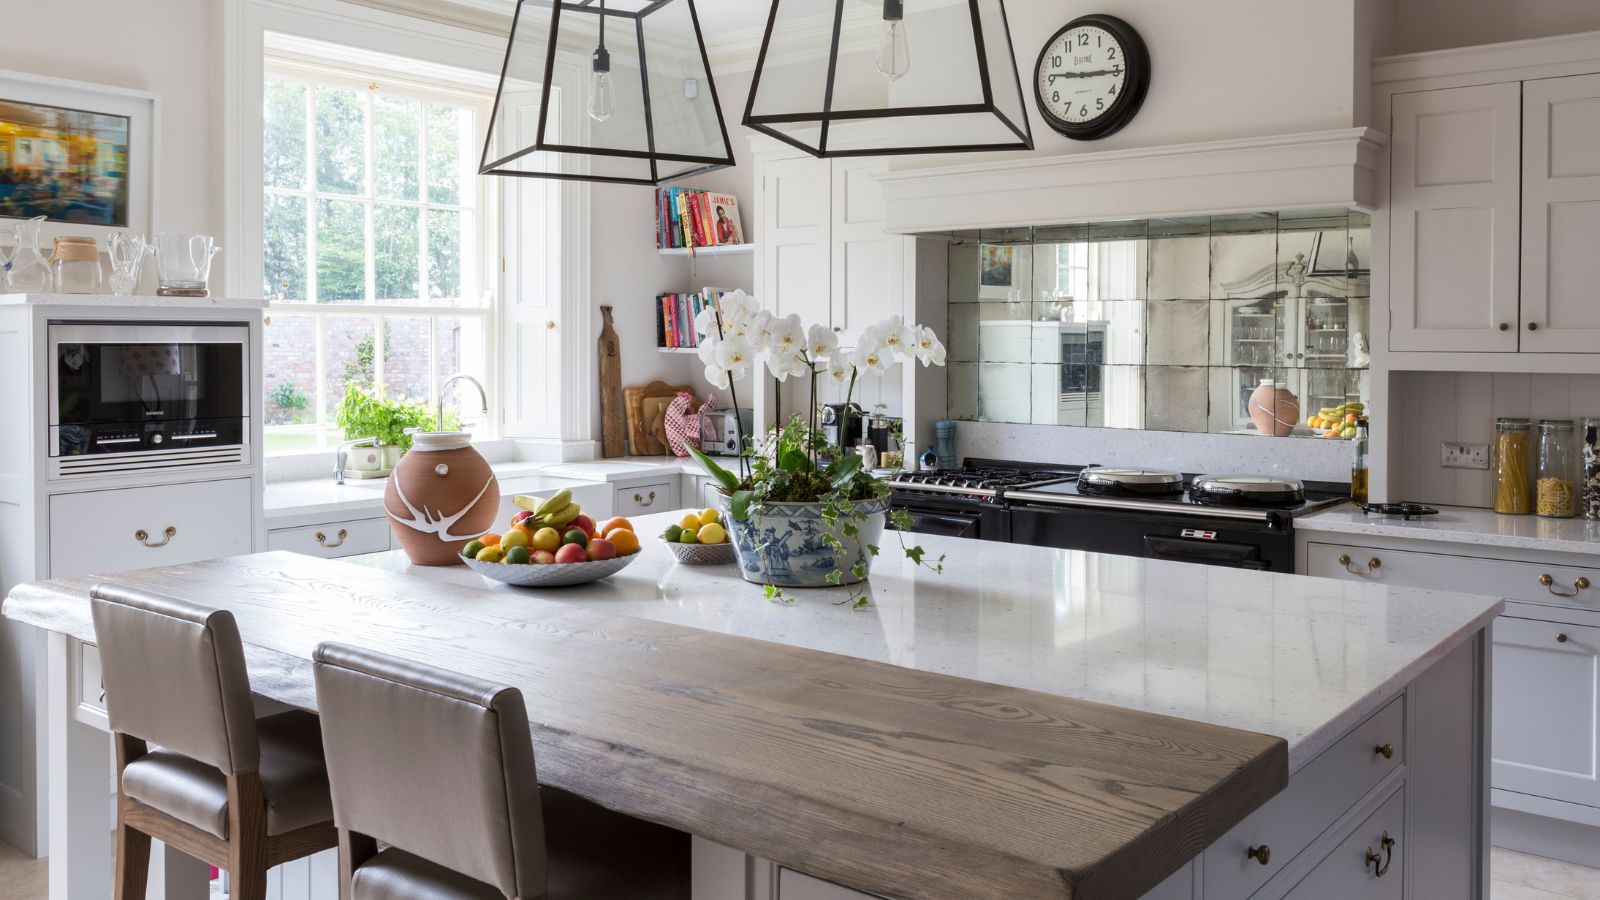 Should your kitchen island have seating The facts and warnings designers think you should know